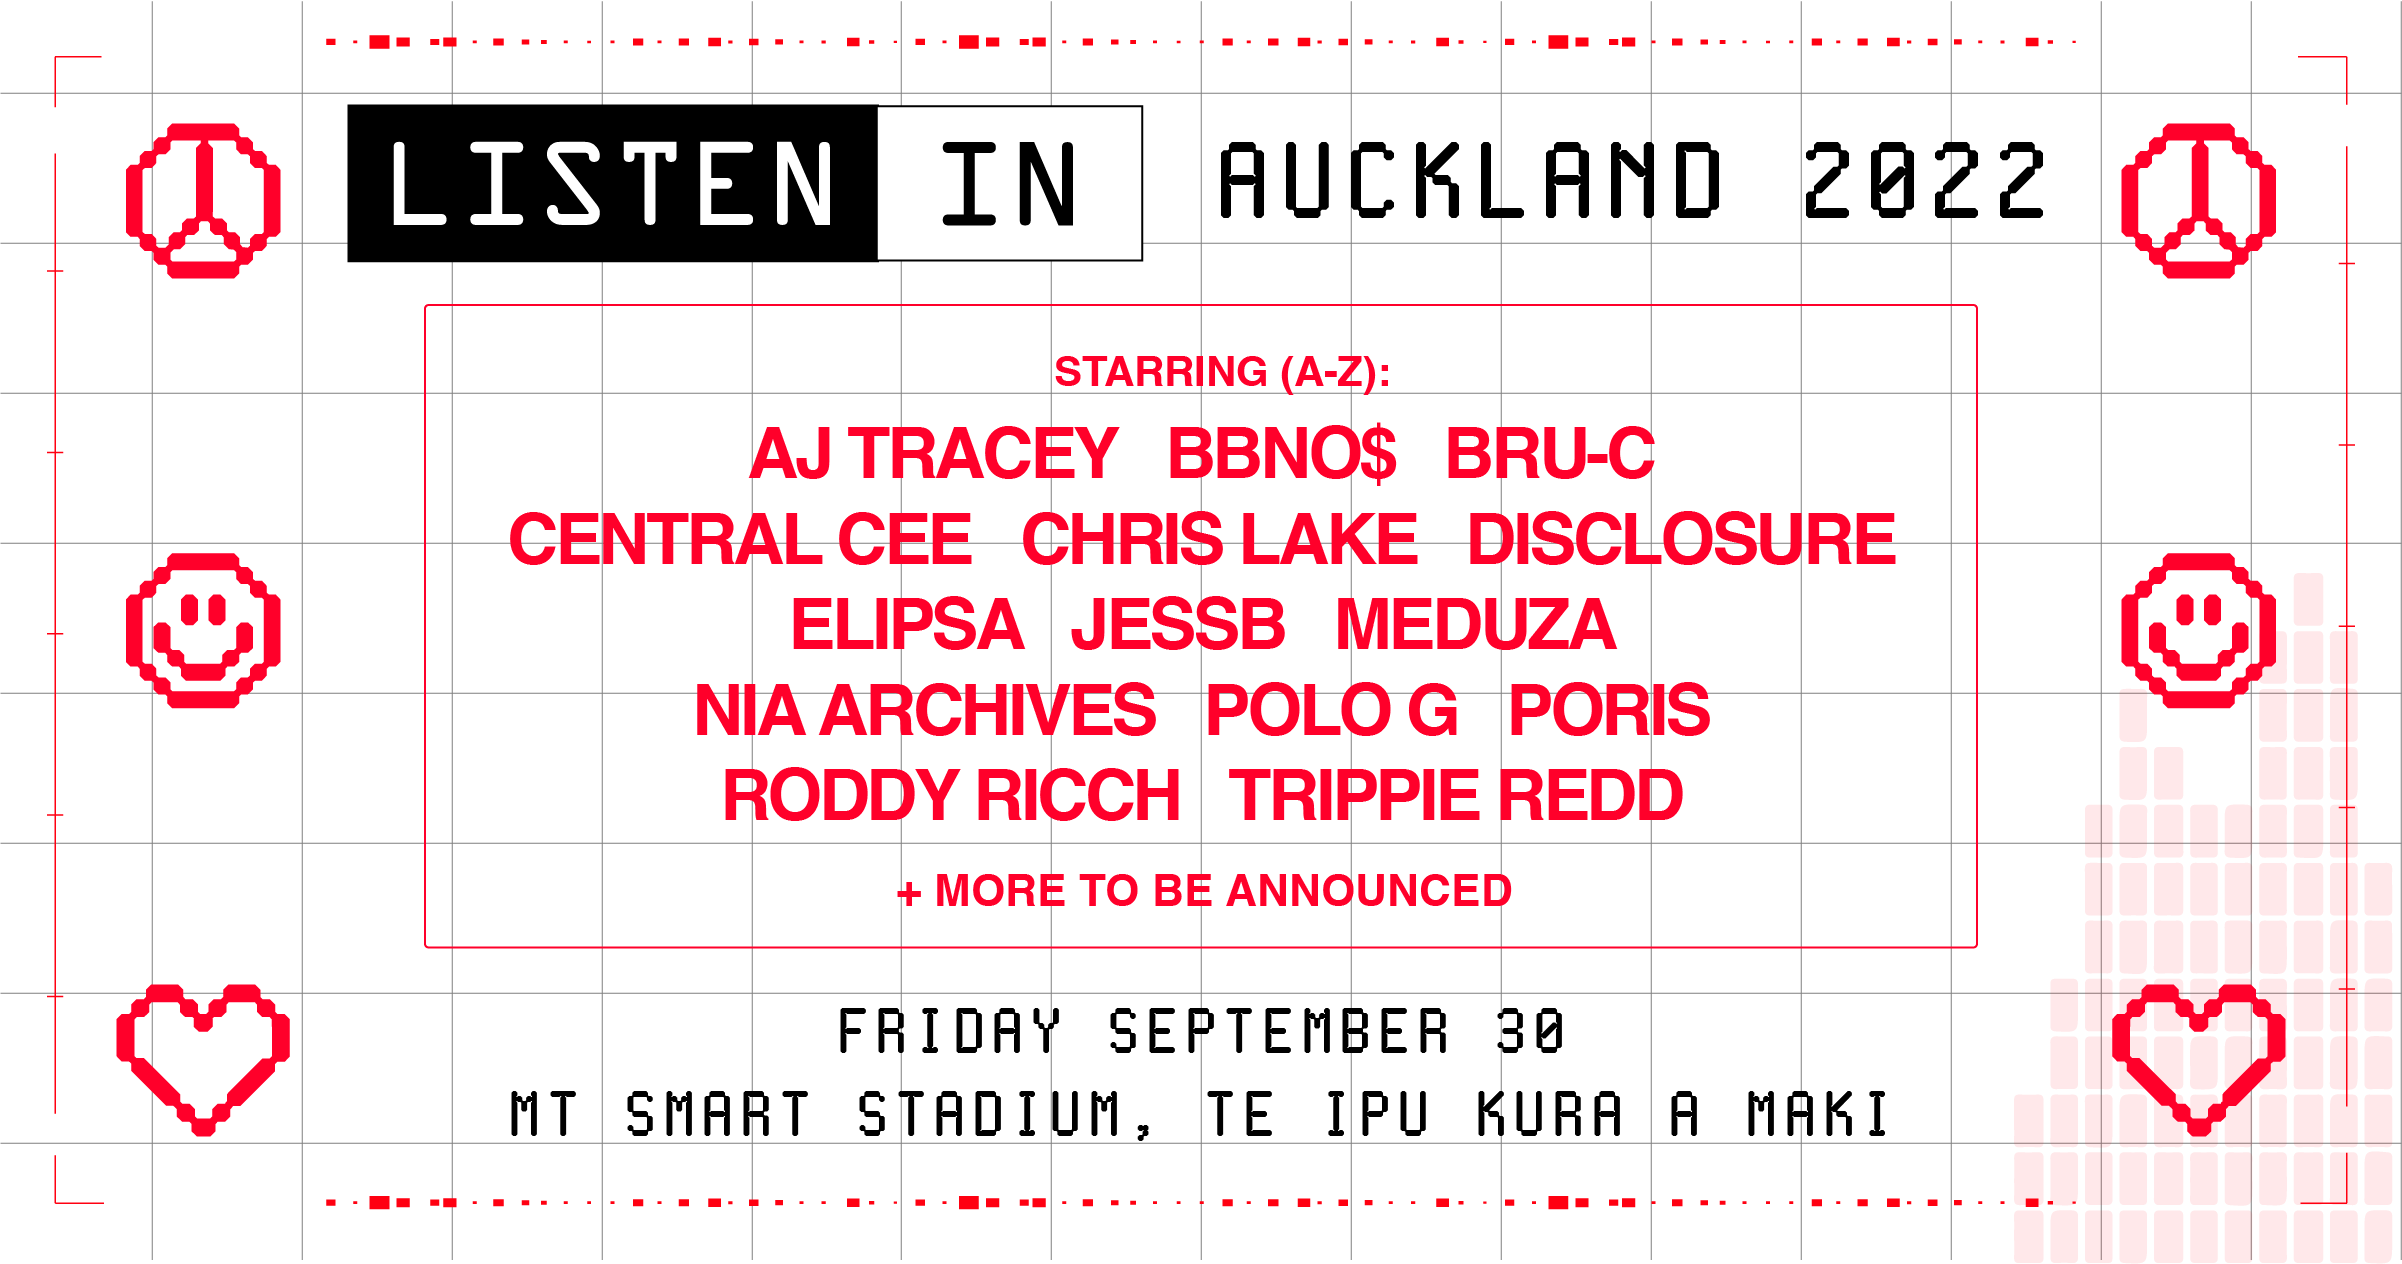 Listen In Auckland Returns With A Stellar Lineup For 2022